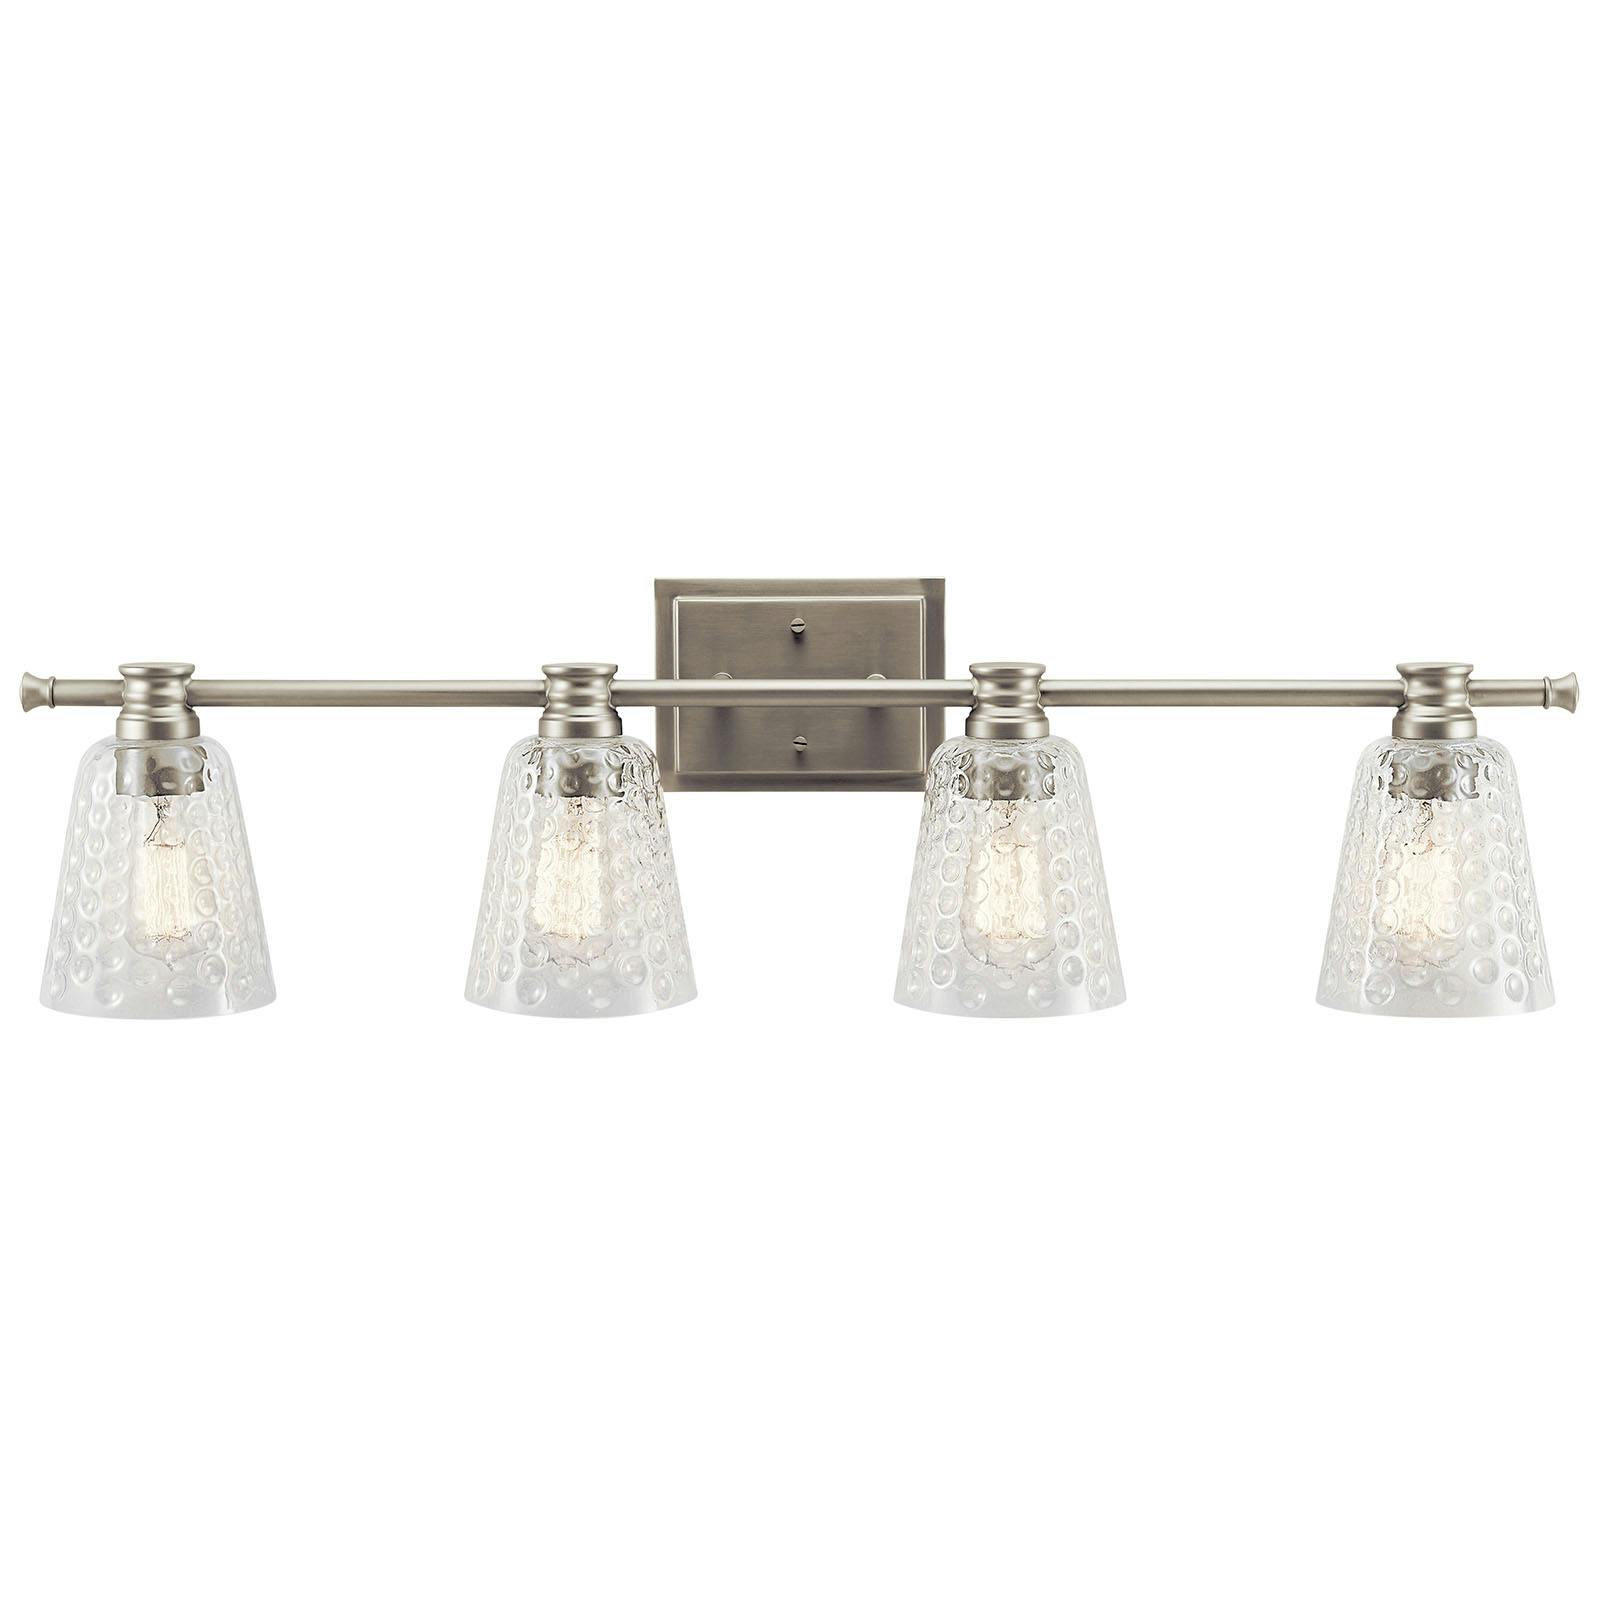 Front view of the Nadine 4 Light Vanity Light Nickel on a white background